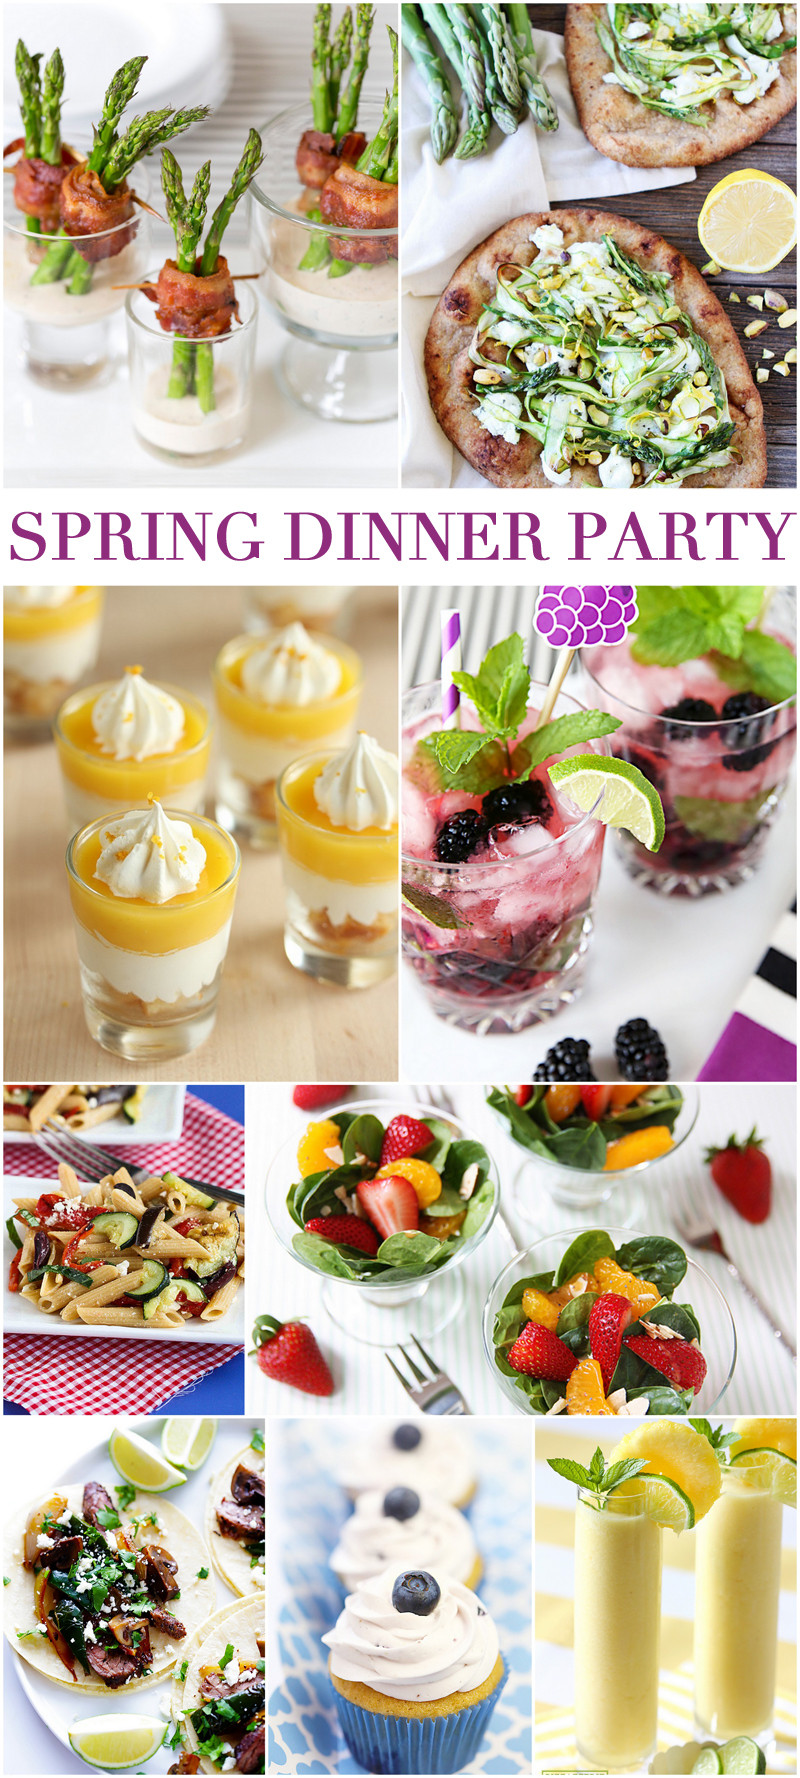 Dinner Party Menu Ideas Food
 Host a Spring Dinner Party in Style